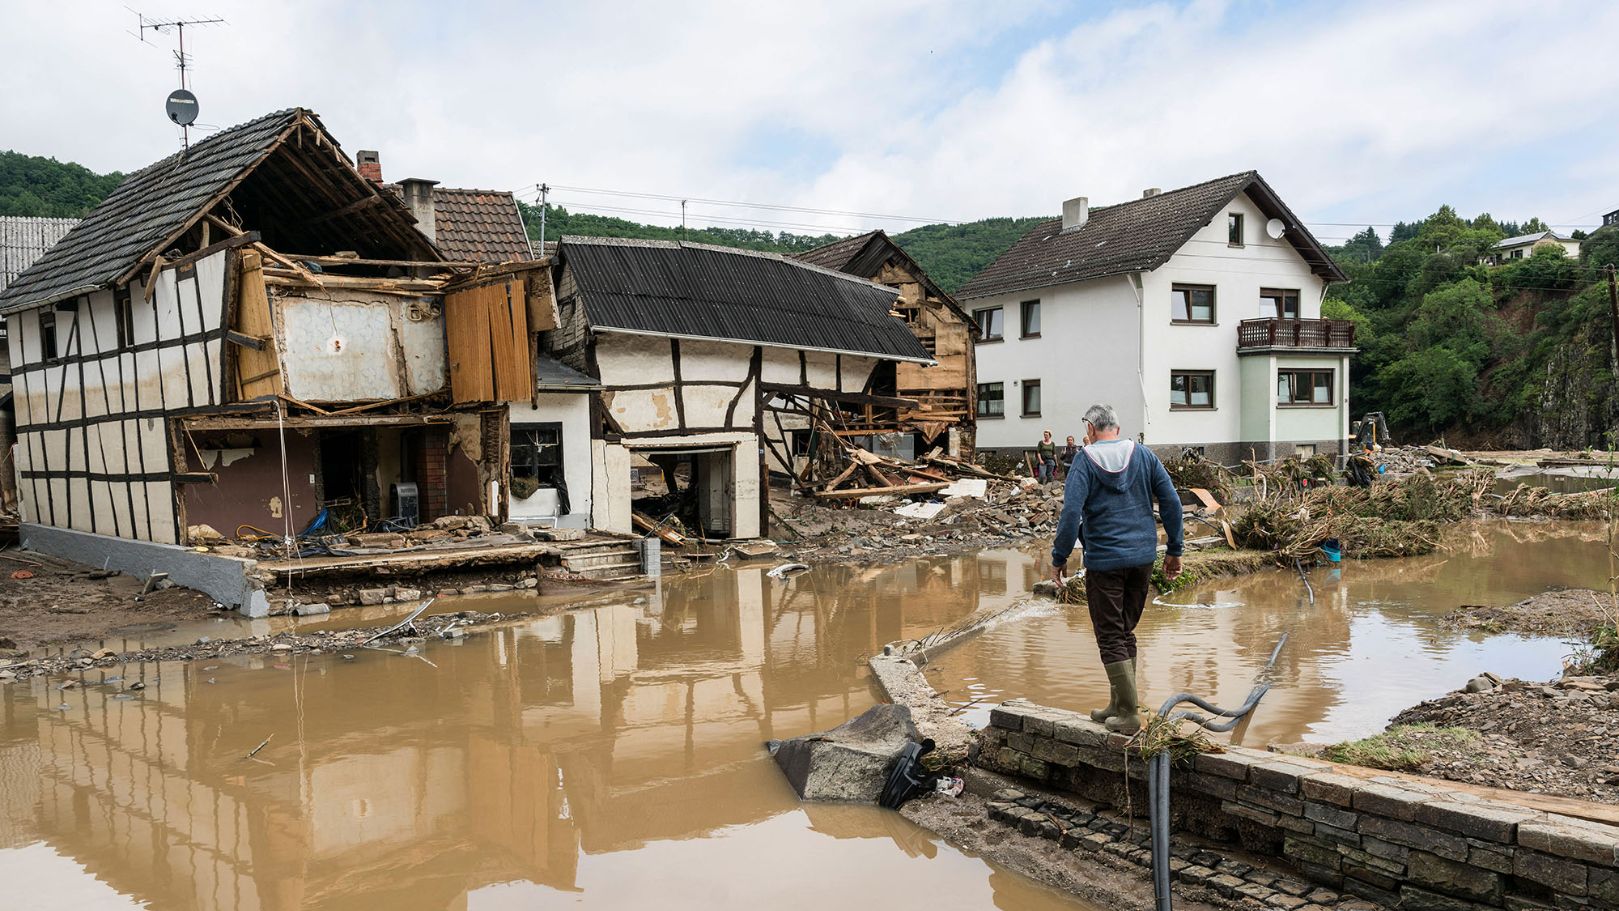 A man walks through the floods towards destroyed houses in Schuld near Bad Neuenahr, western Germany, on July 15, 2021. - Heavy rains and floods lashing western Europe have killed at least 42 people in Germany and left many more missing, as rising waters led several houses to collapse. (Photo by Bernd LAUTER / AFP)